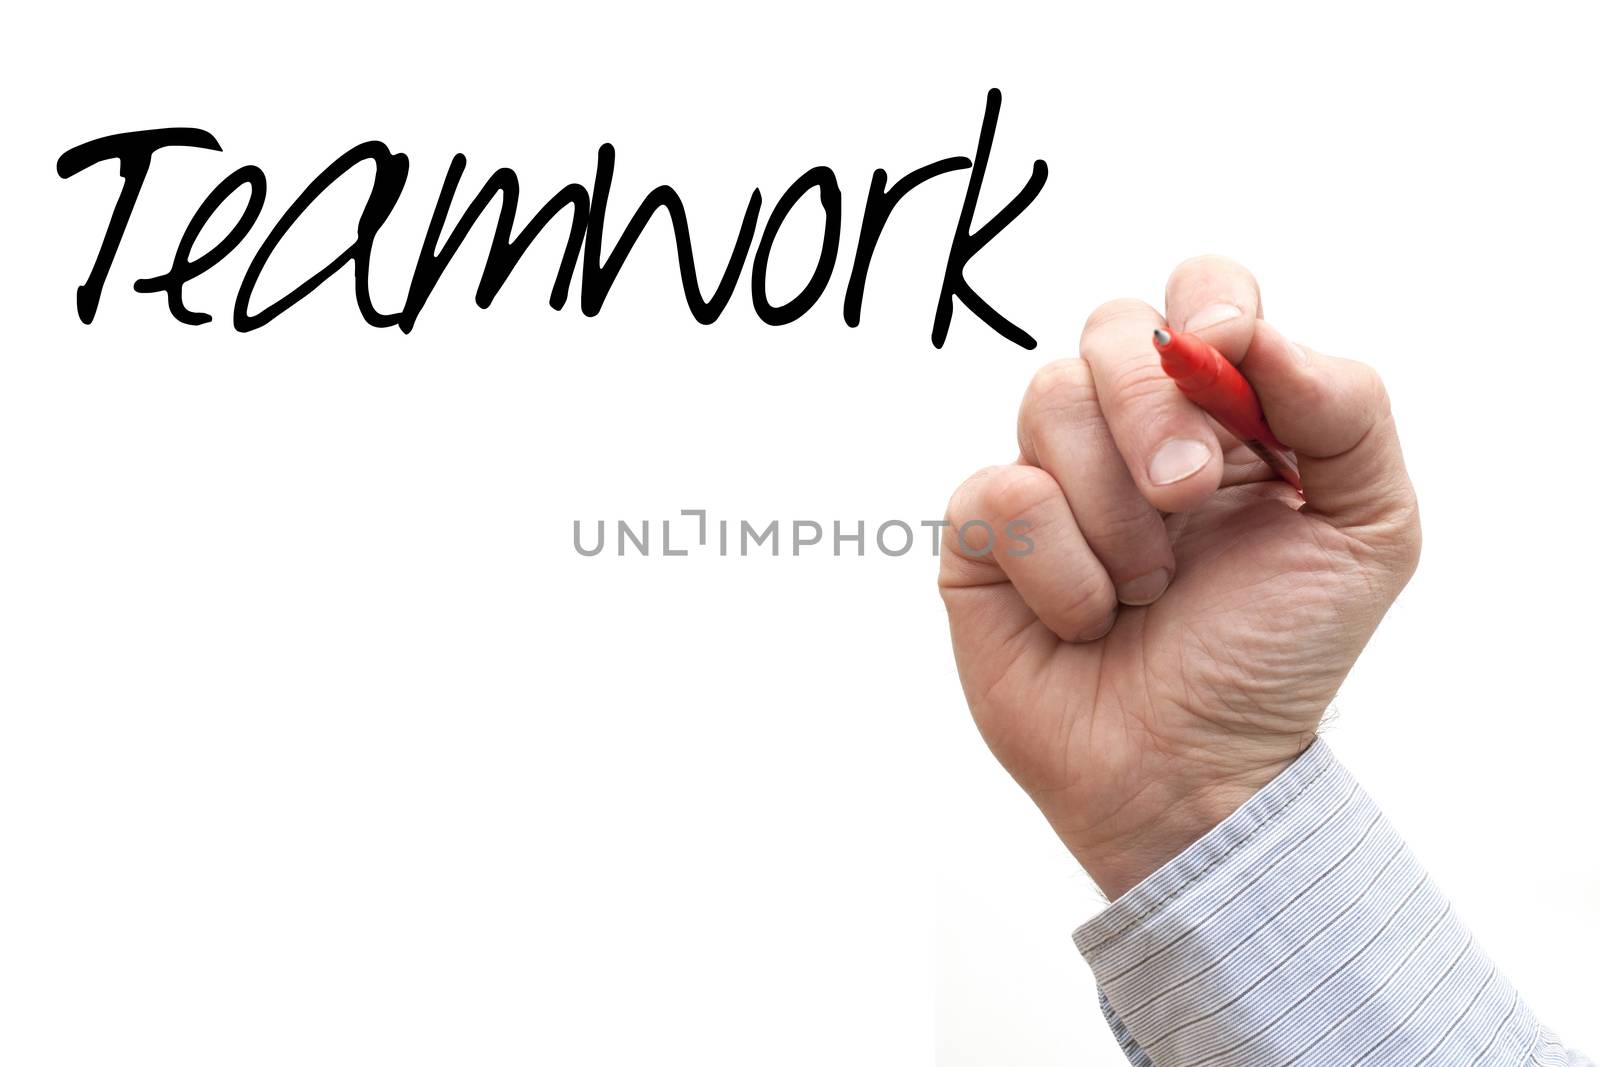 A Photo / Illustration of a Hand Writing 'Teamwork'